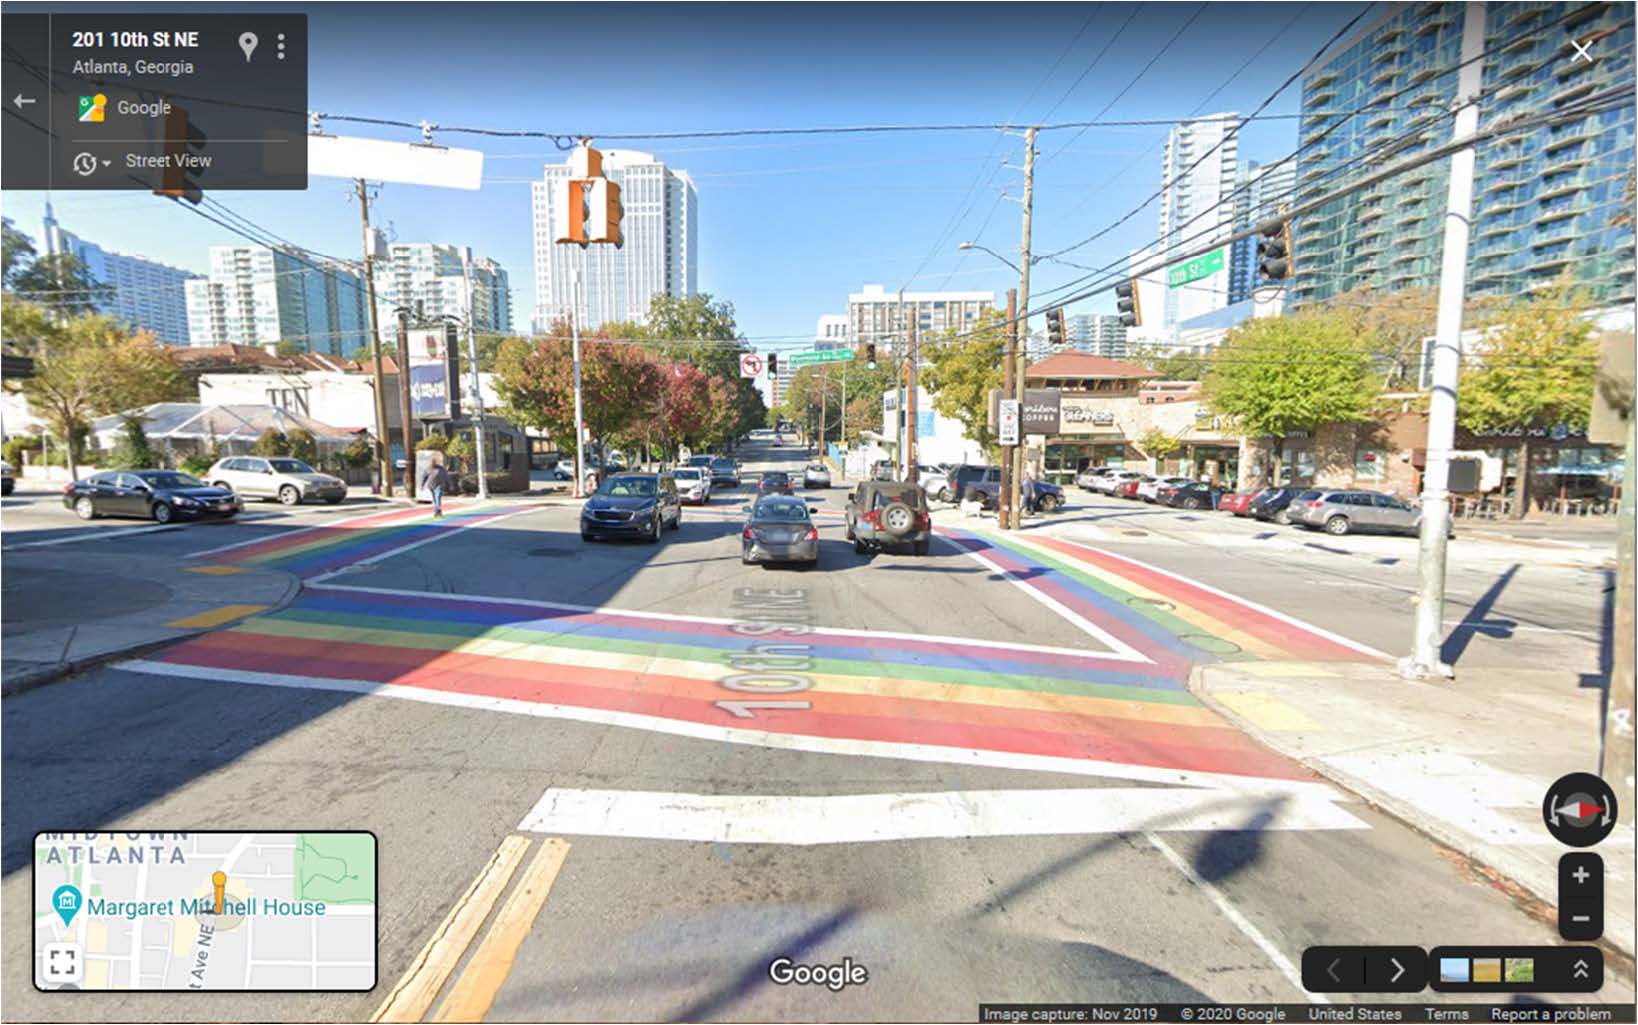 Street view image shows an intersection with non-traditional crosswalks, that are rainbow-striped.